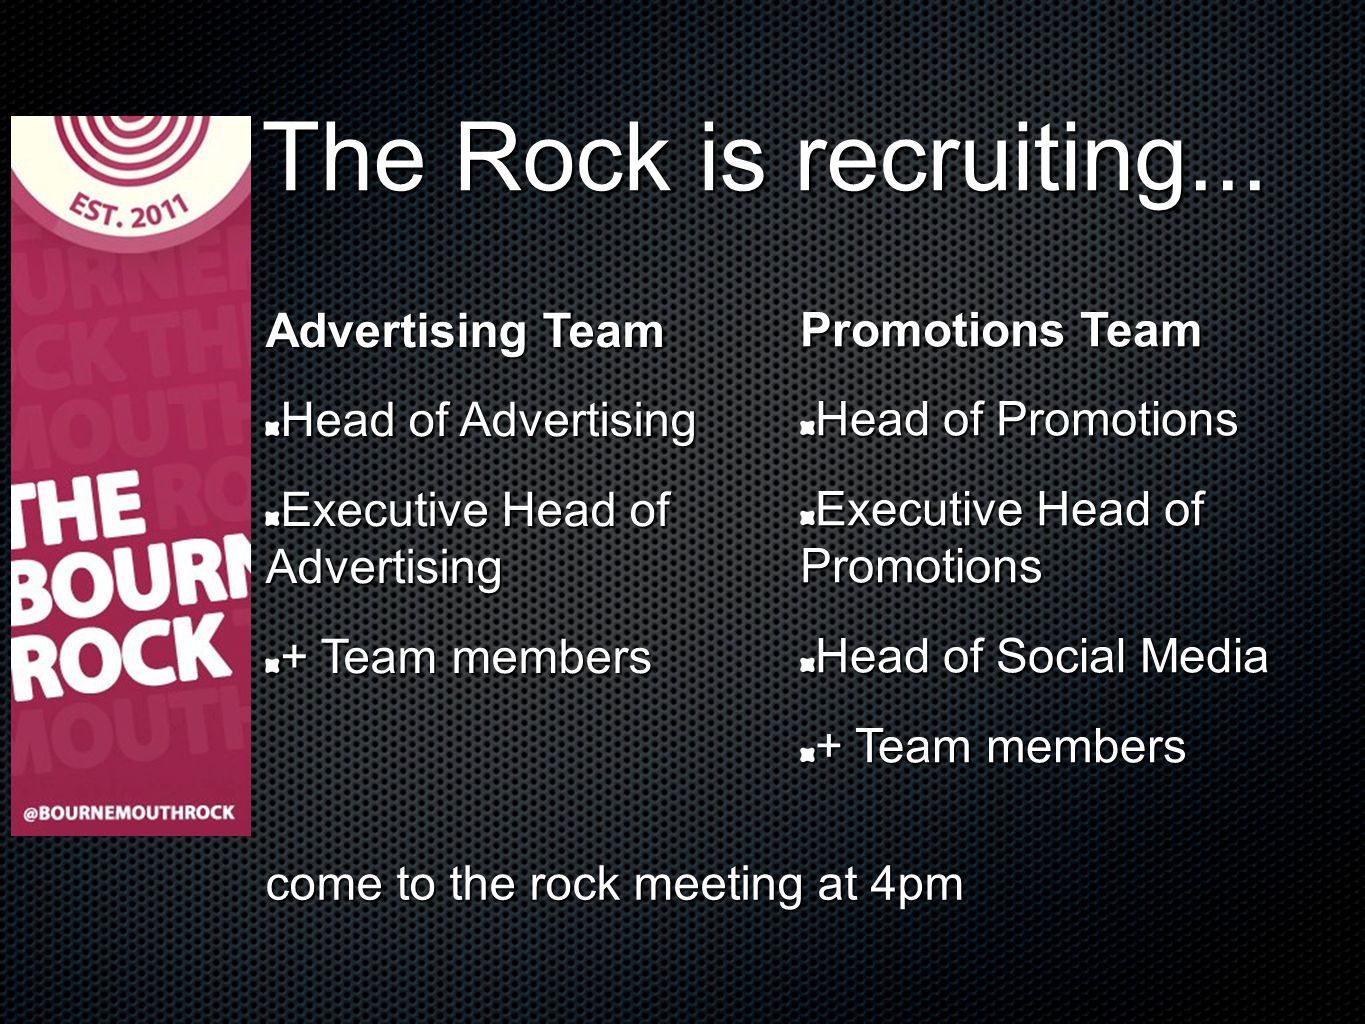 The Rock is recruiting...